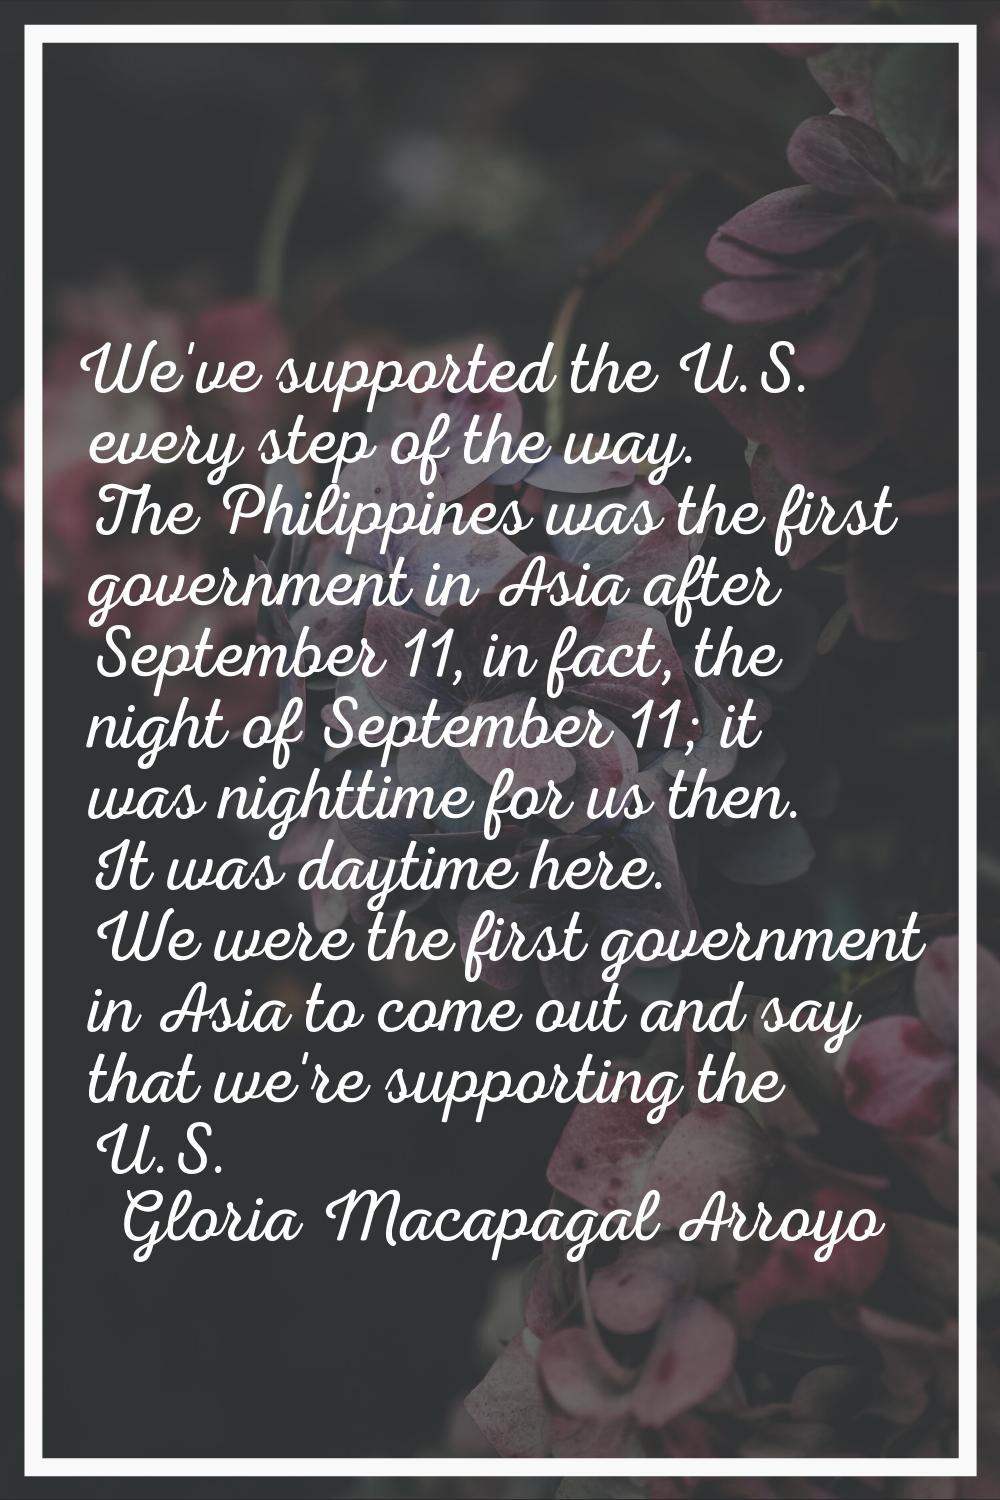 We've supported the U.S. every step of the way. The Philippines was the first government in Asia af